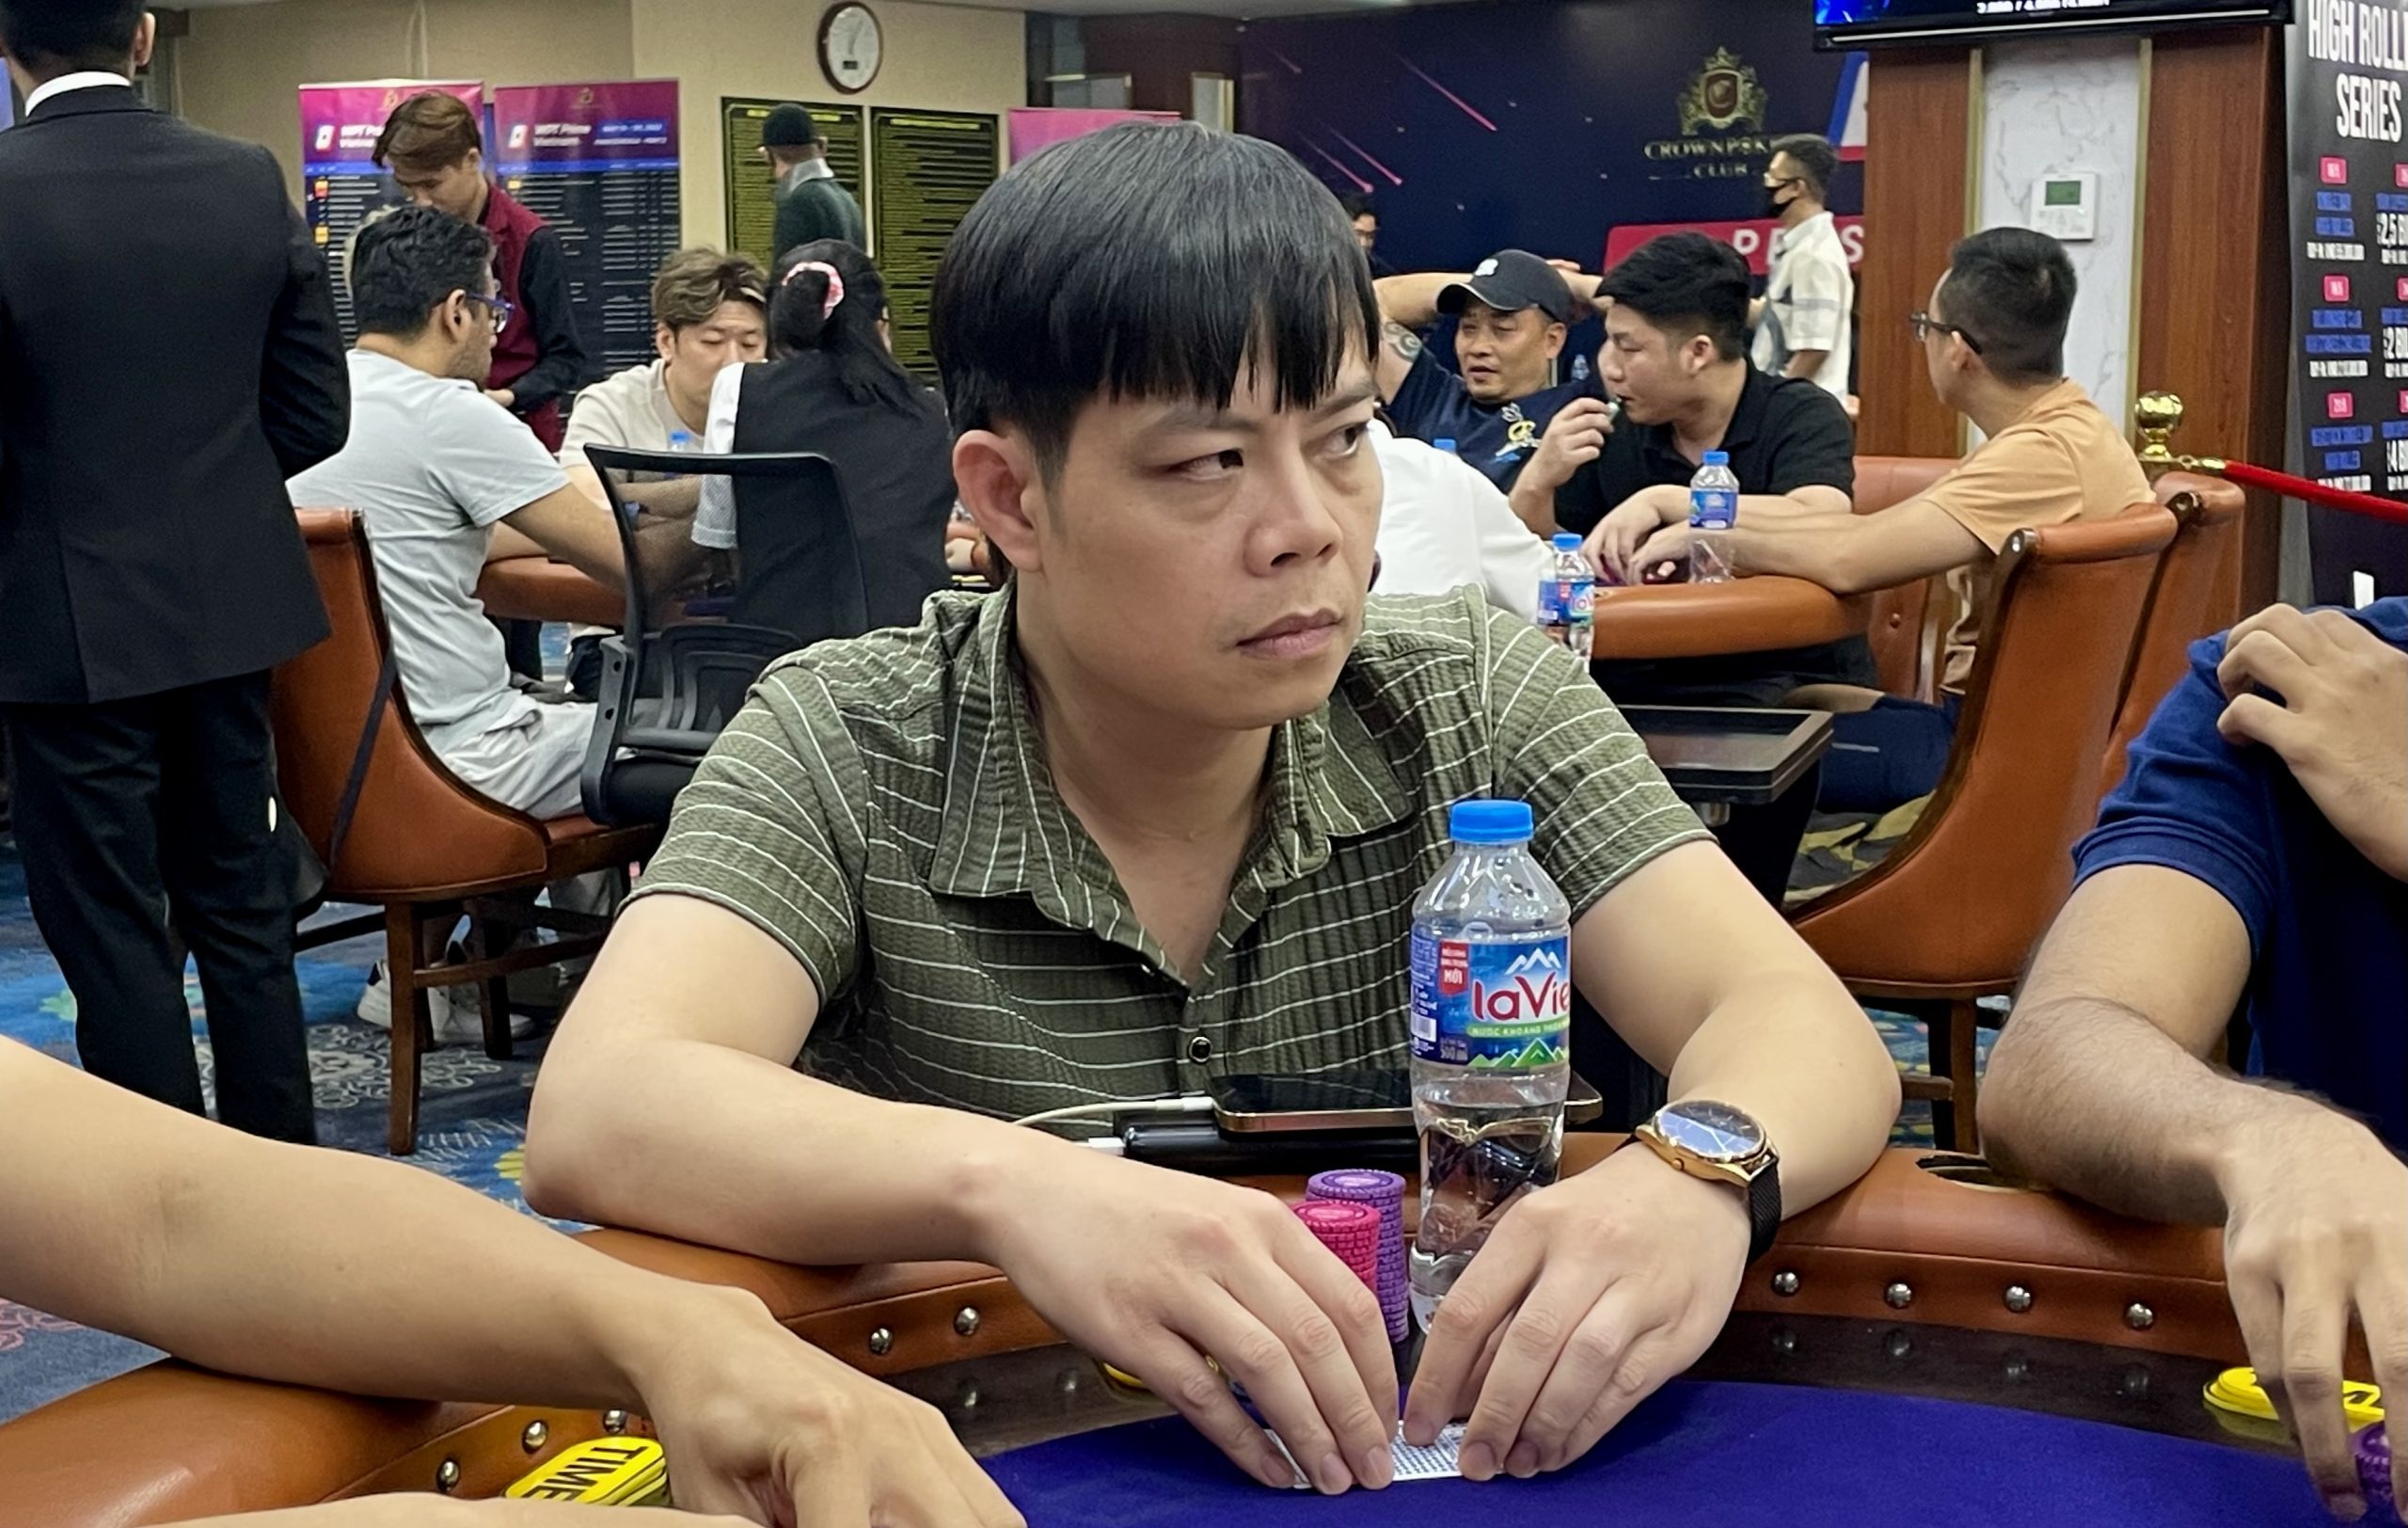 WPT Prime Vietnam: Opener draws 510 entries; 65 advance led by NgọC Anh Cao, Lưu Danh TuấN; Dinh Tien Thanh wins Turbo NLH